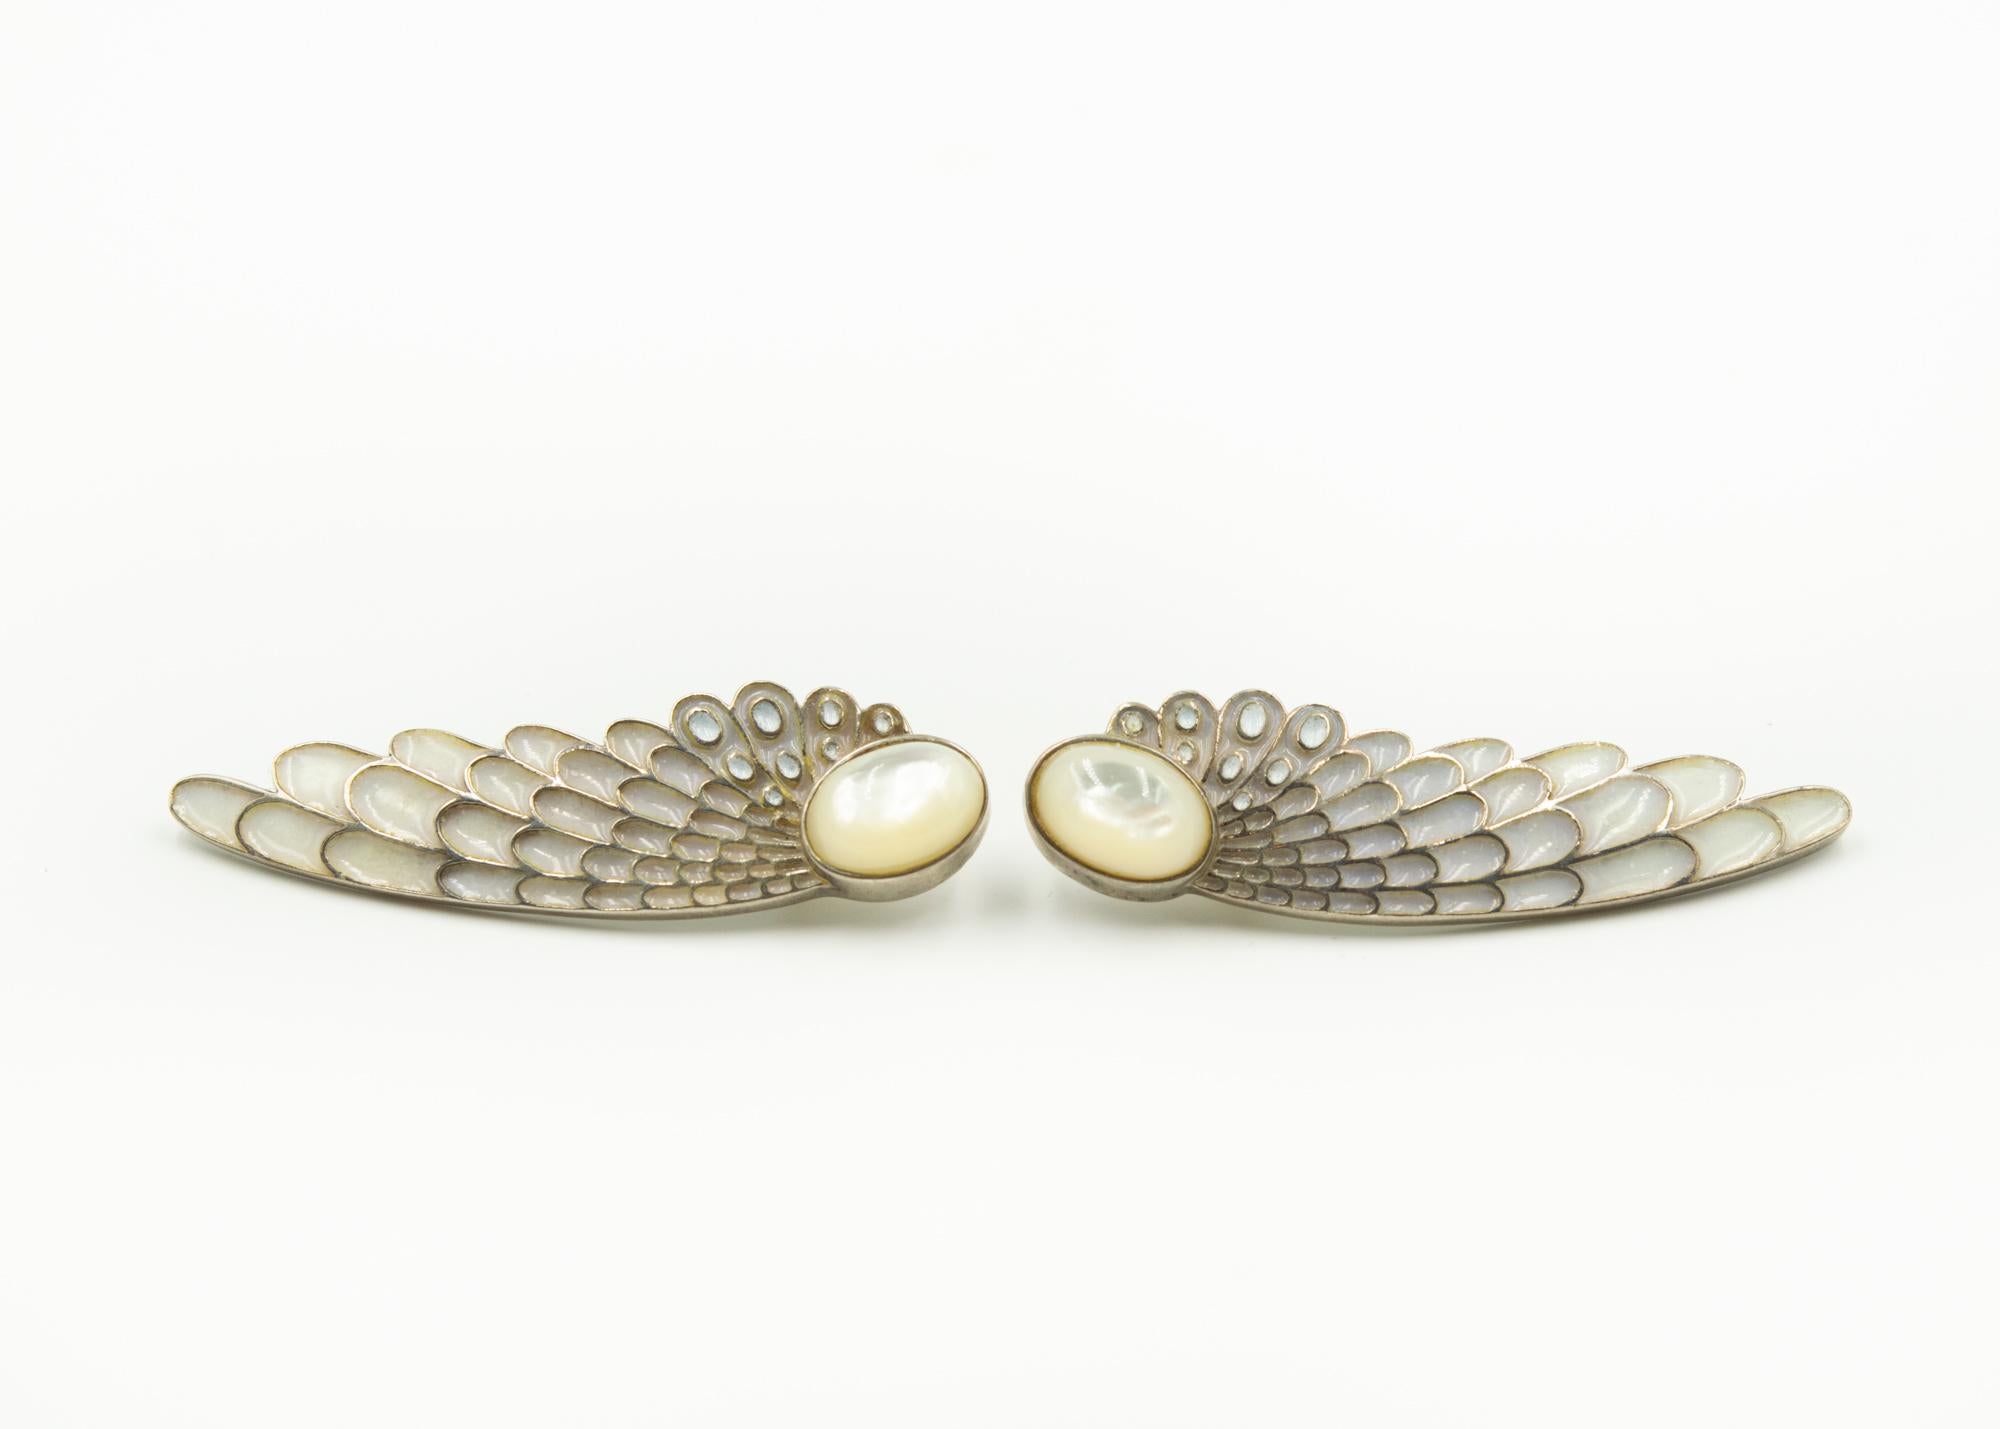  ERTÉ  sterling silver earrings designed in a winged pattern with white enamel, and two mother-of-pearl oval cabochons measuring approximately 9 x 13 millimeter.  One earrings is signed ©CFA Sterling and the other has ERTe etched into it with the